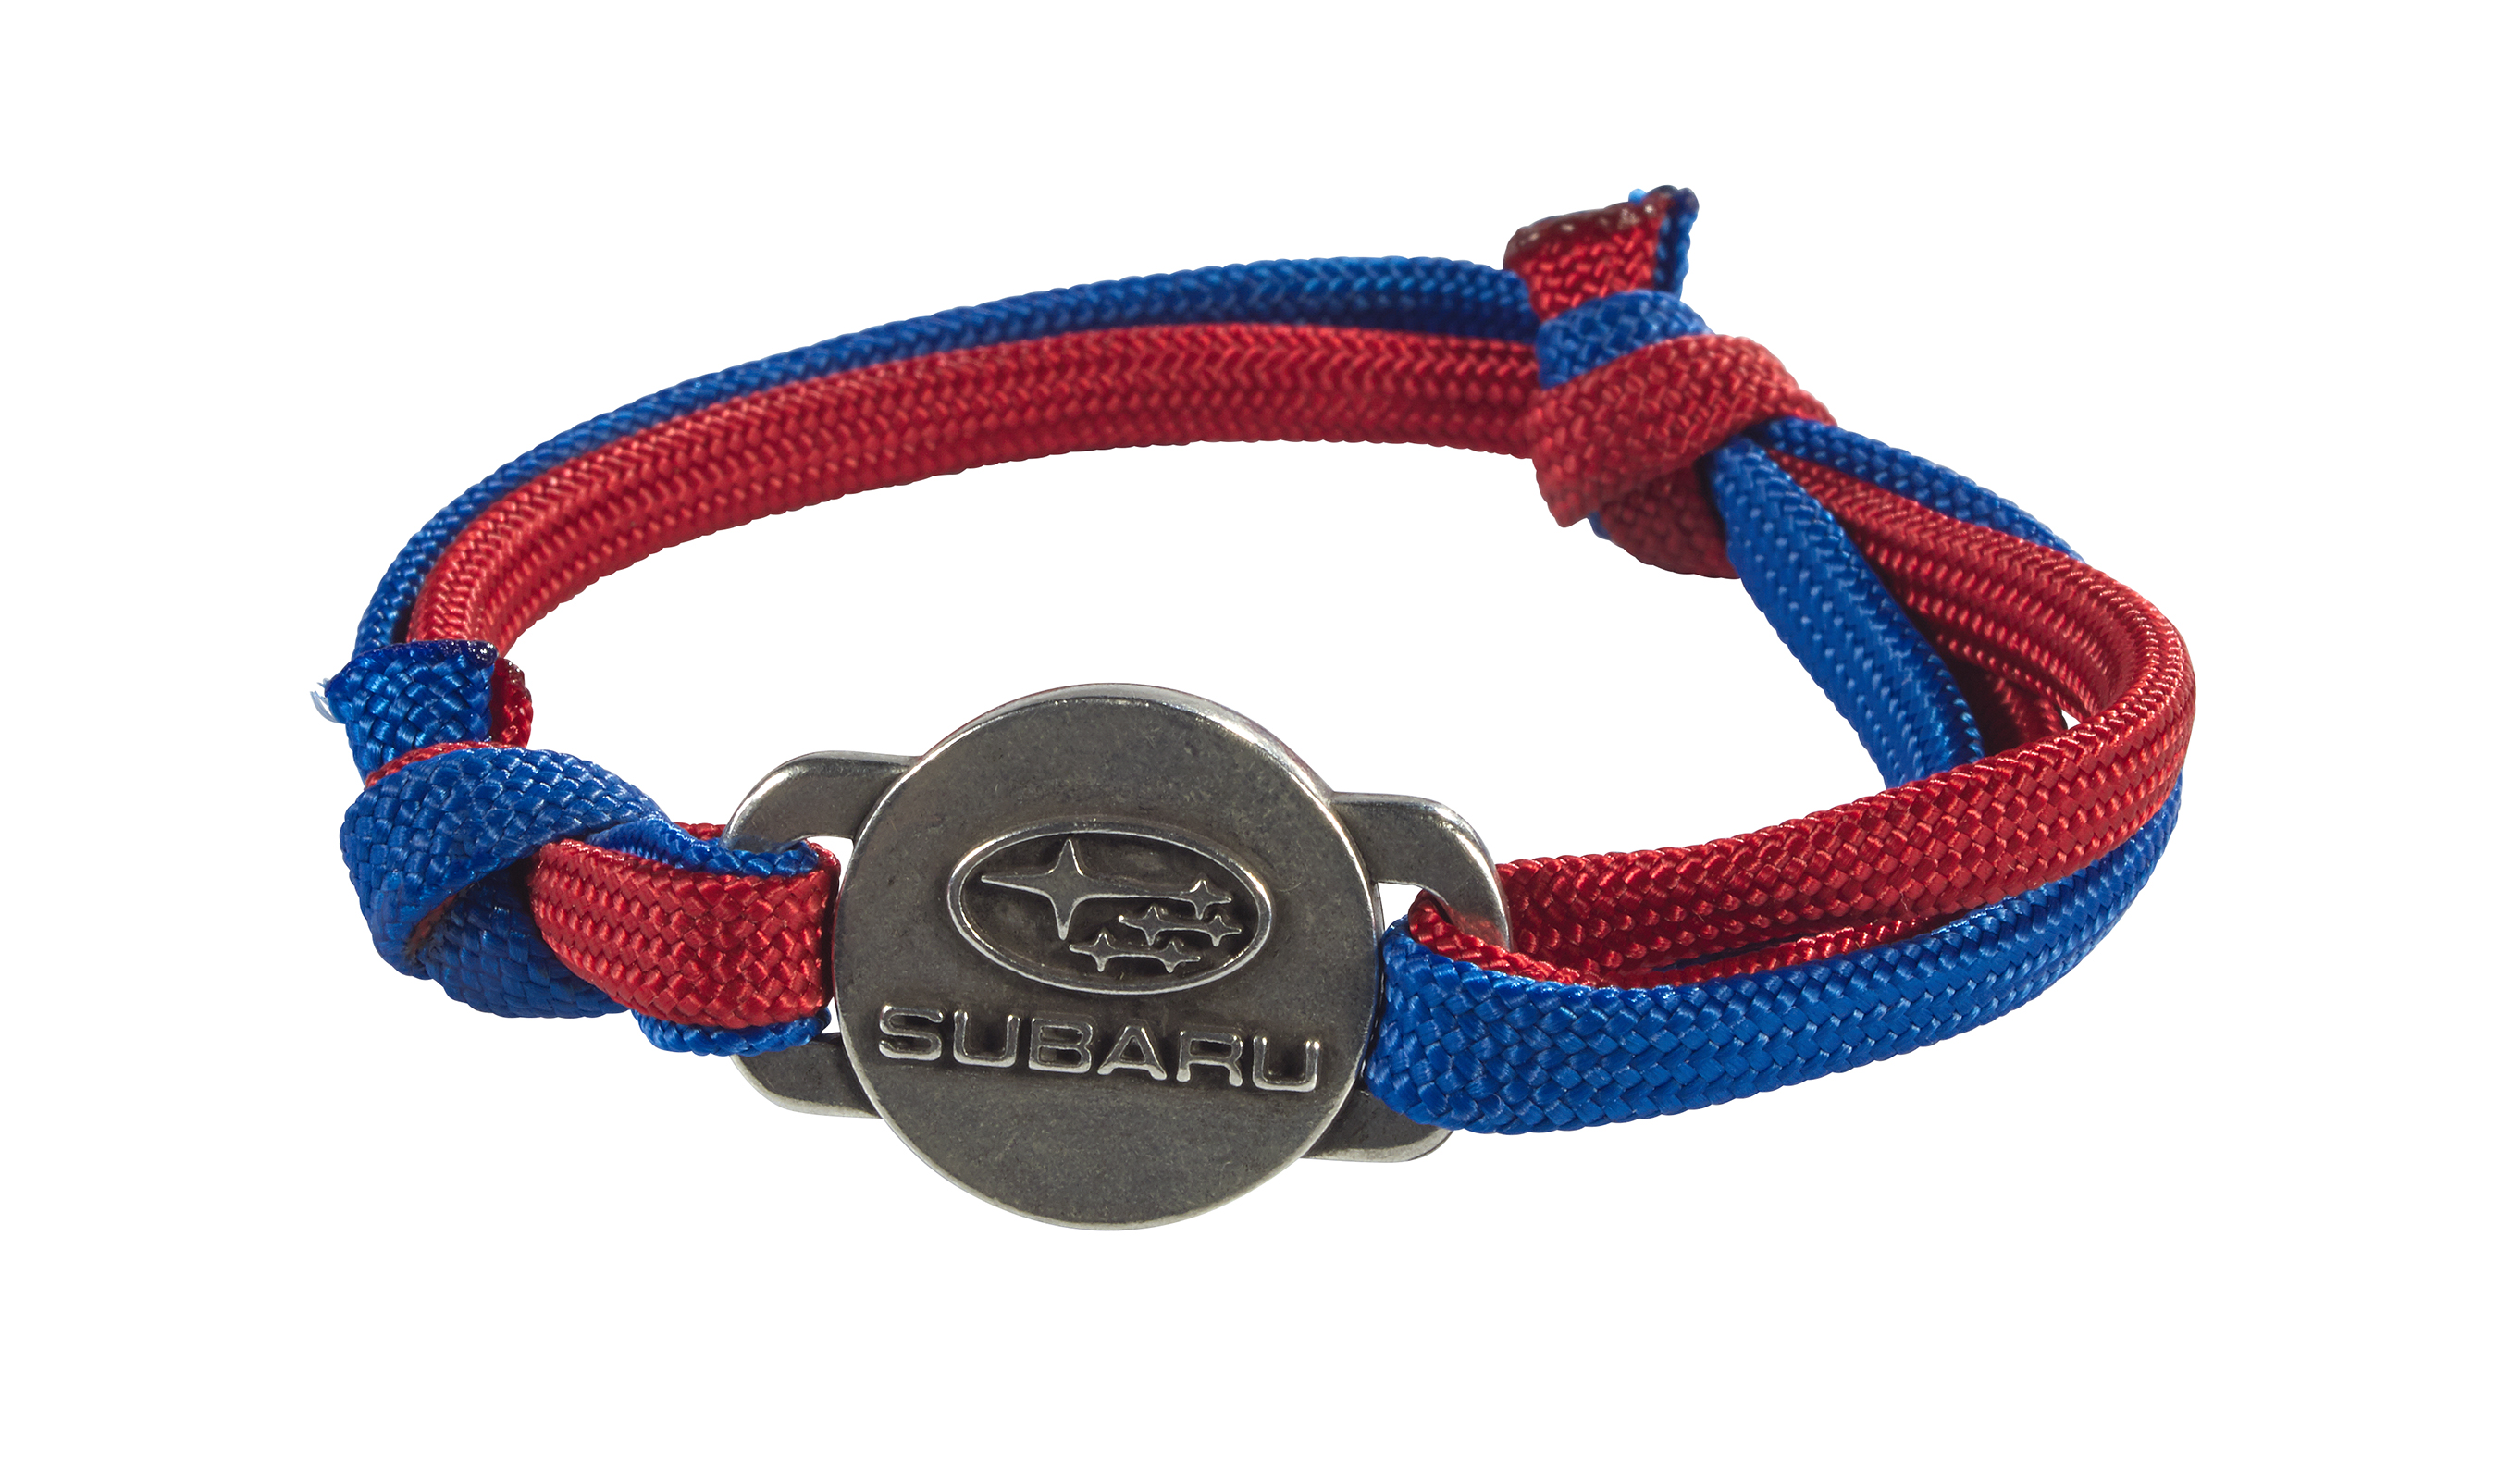 Those who write a message of hope will receive an awareness bracelet to help share LLS and Subaru's goal of providing hope and care, one gesture at a time.